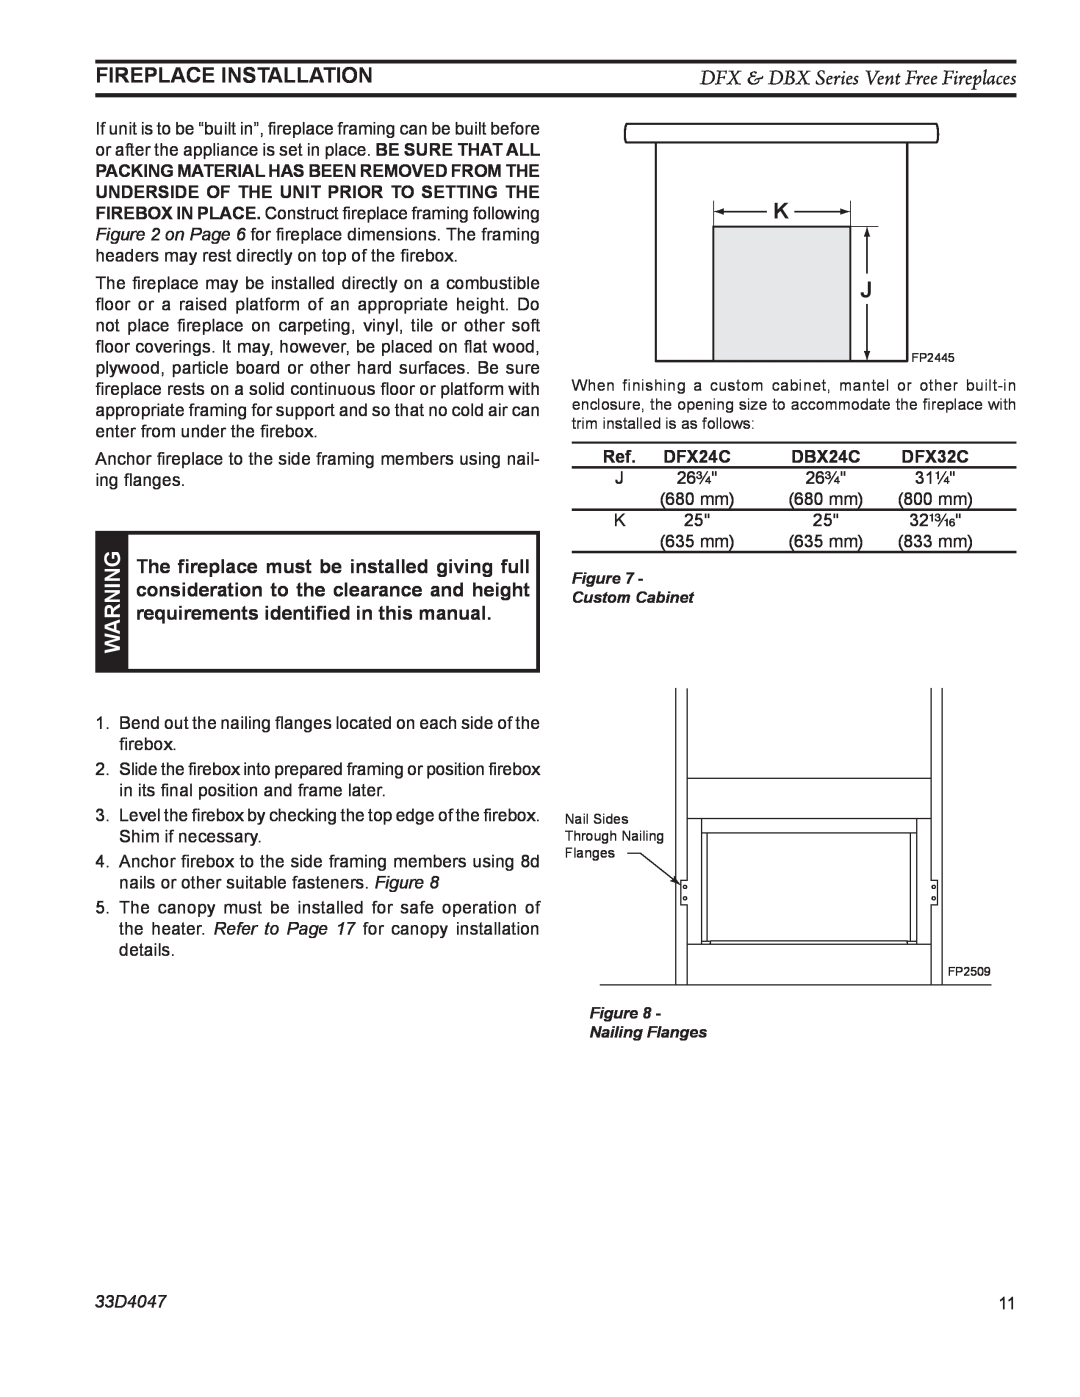 Monessen Hearth DFX24C operating instructions Fireplace Installation, The fireplace must be installed giving full, 33D4047 